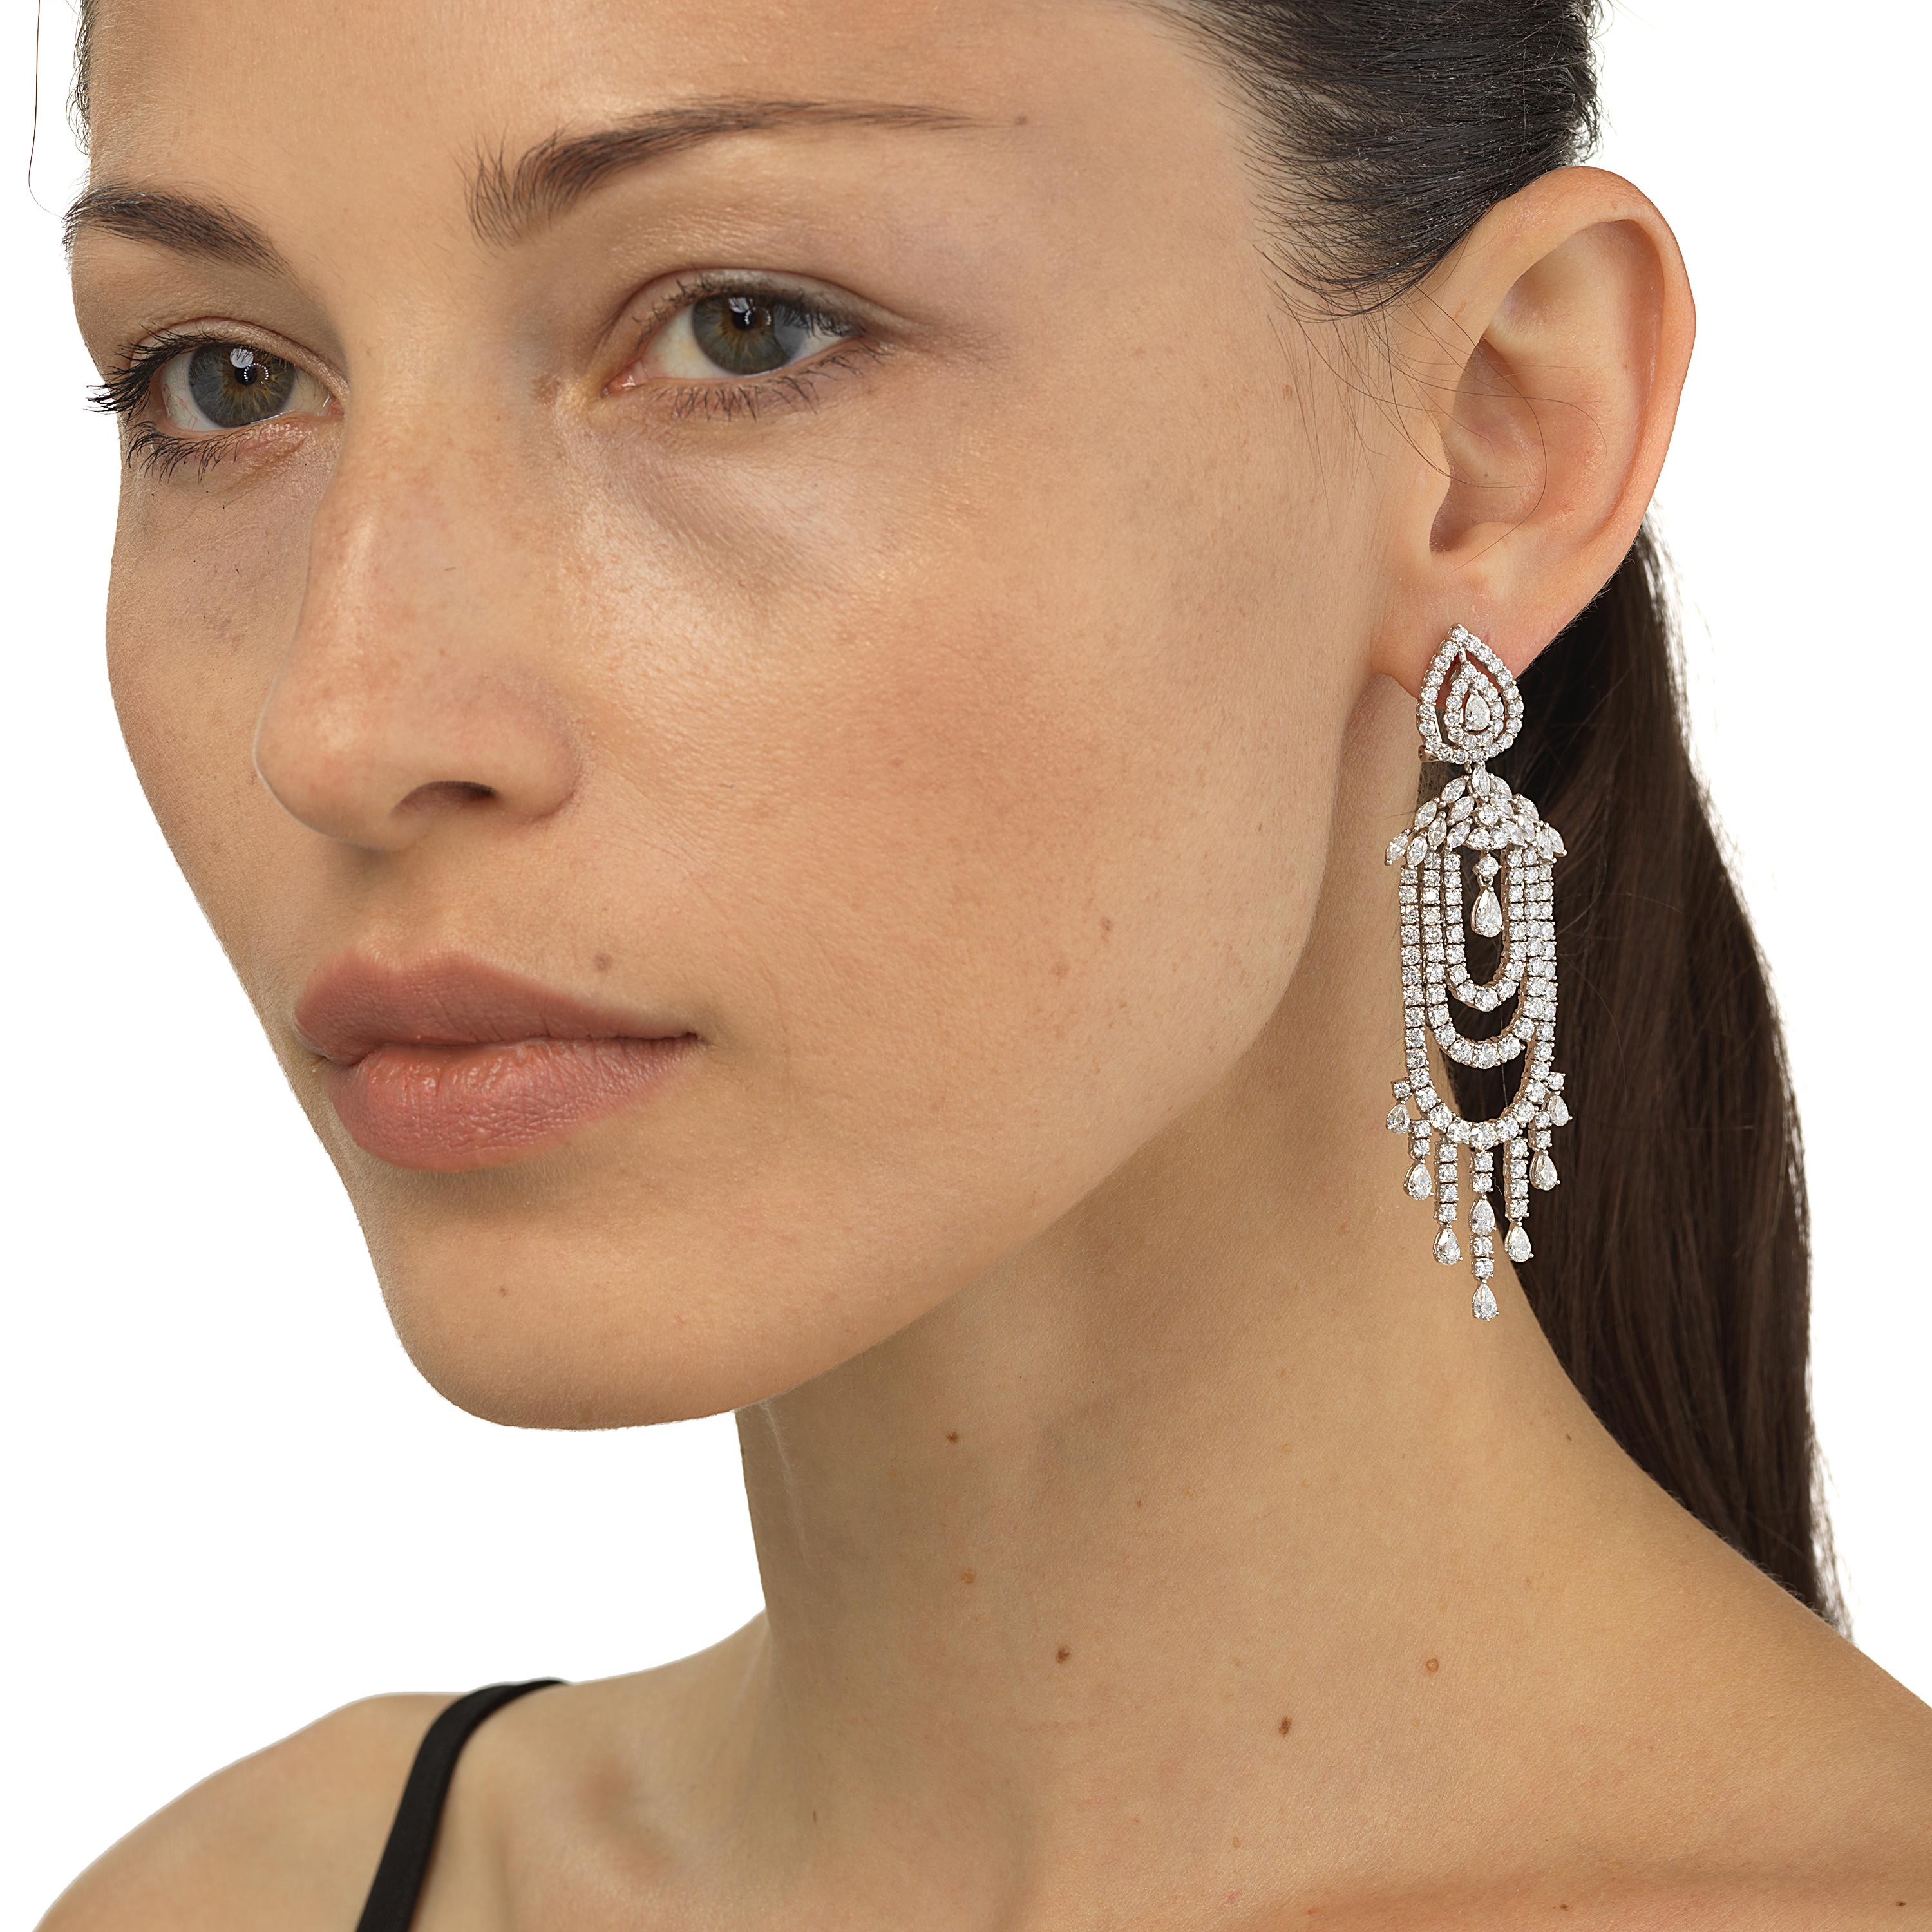 This 18 Karat white gold diamond multi-string chandelier dangle earring is a fashion articulated. Shine in the beauty of diamonds with these amazing dangle earrings. Set in 18 Karat white gold these danglers glimmer with 12.26 Cts of varied shapes